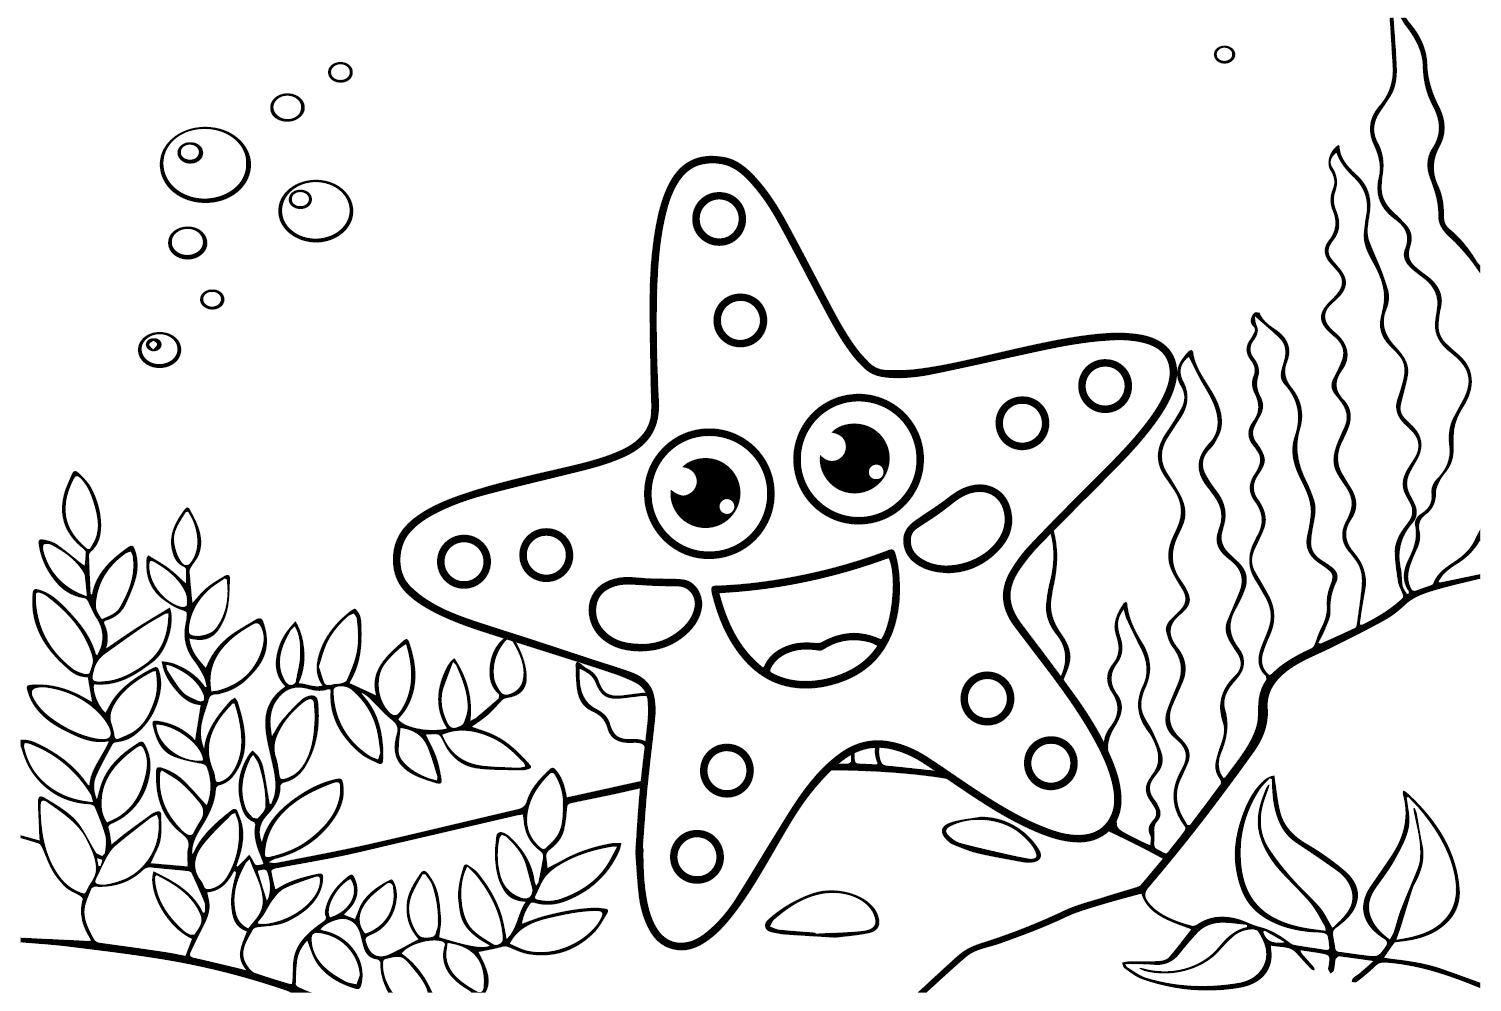 Starfish Pictures Coloring Page - Free Printable Coloring Pages